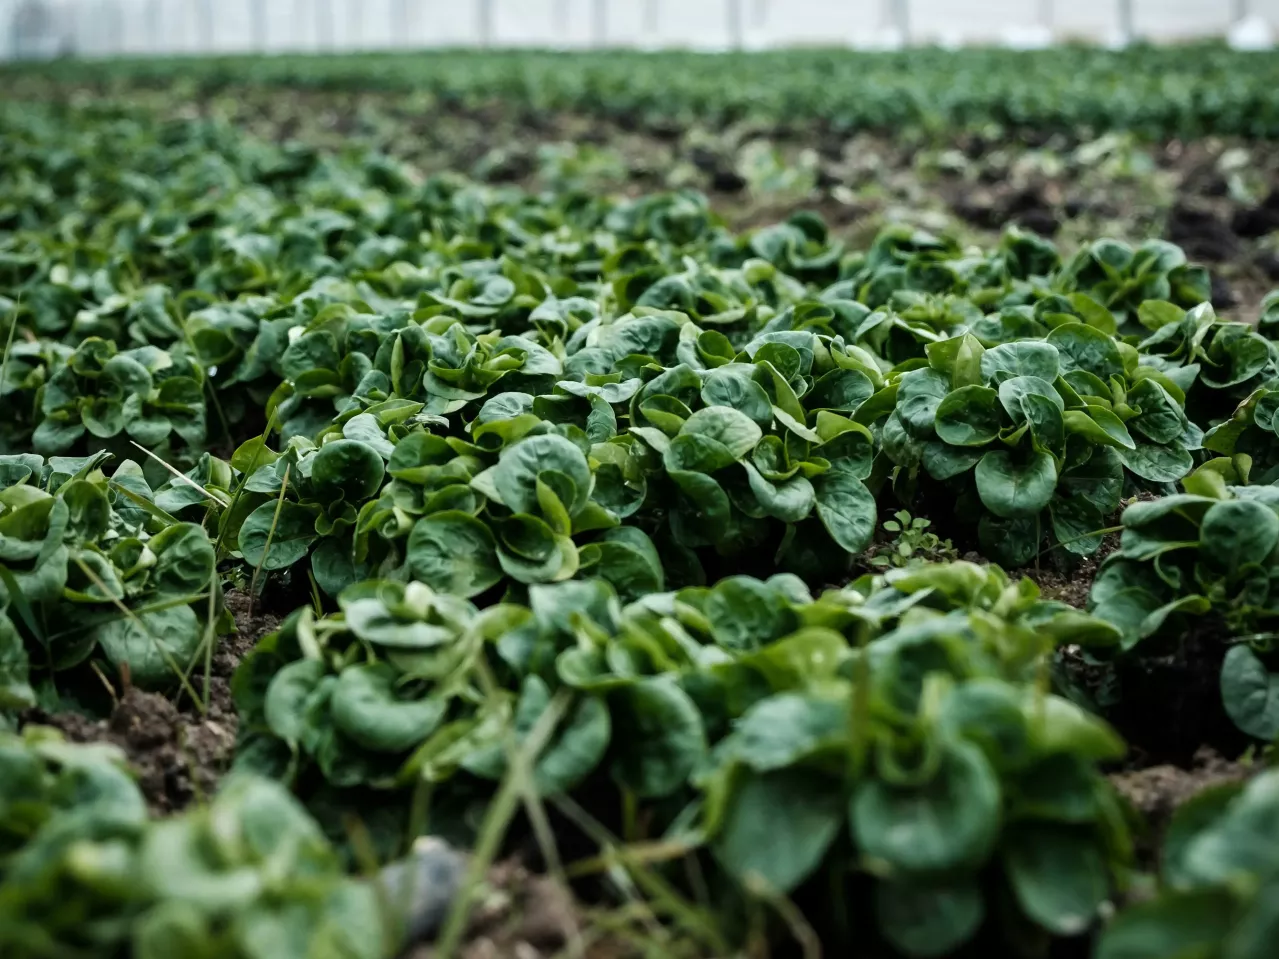 A close-up photo of vibrant green spinach leaves growing in neat rows in a field.